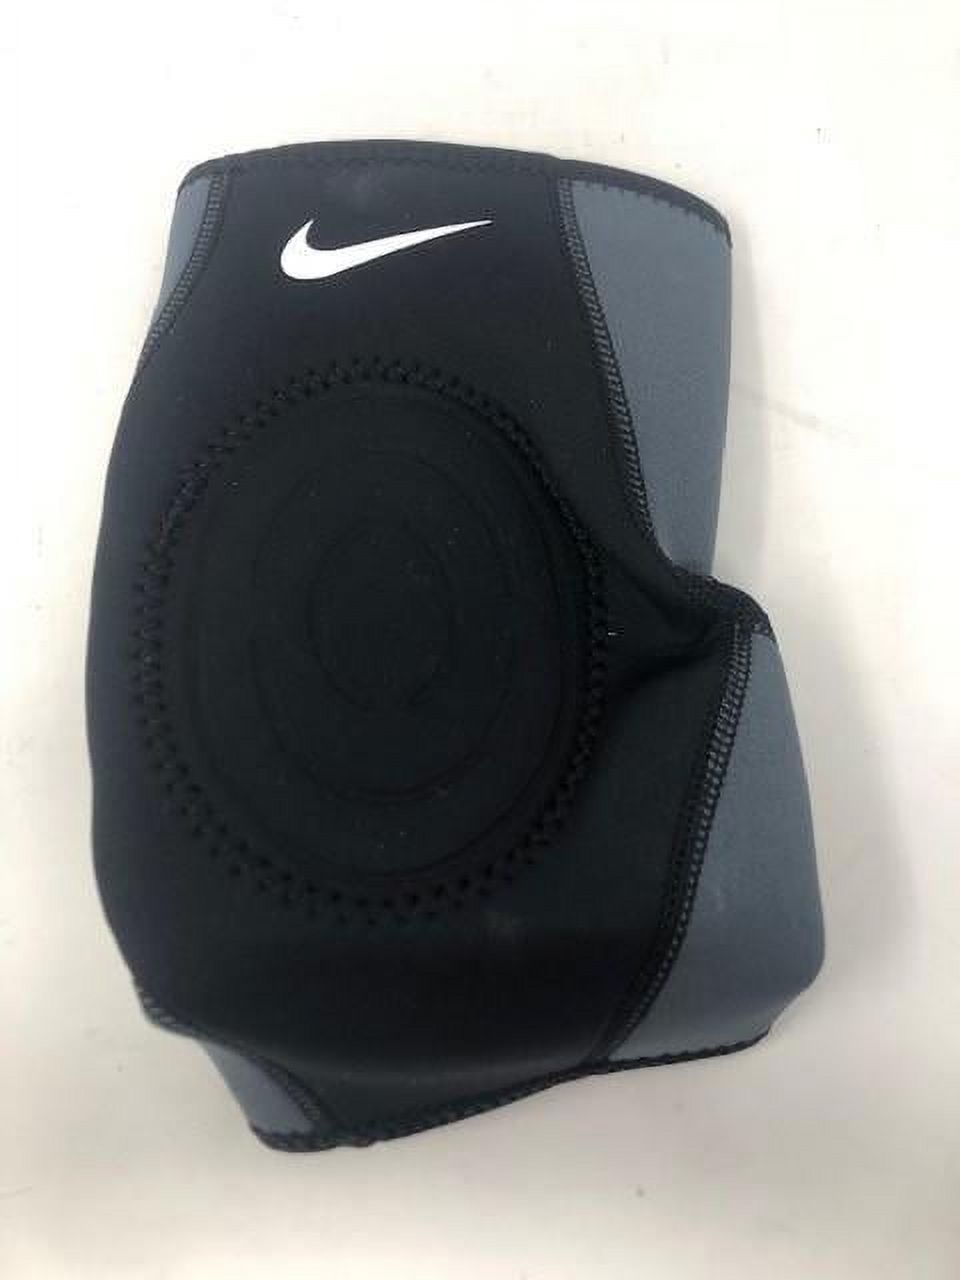 Nike Max Support Protective Neo Sleeve - Single Sleeve - XL (Black/Grey) - image 1 of 4